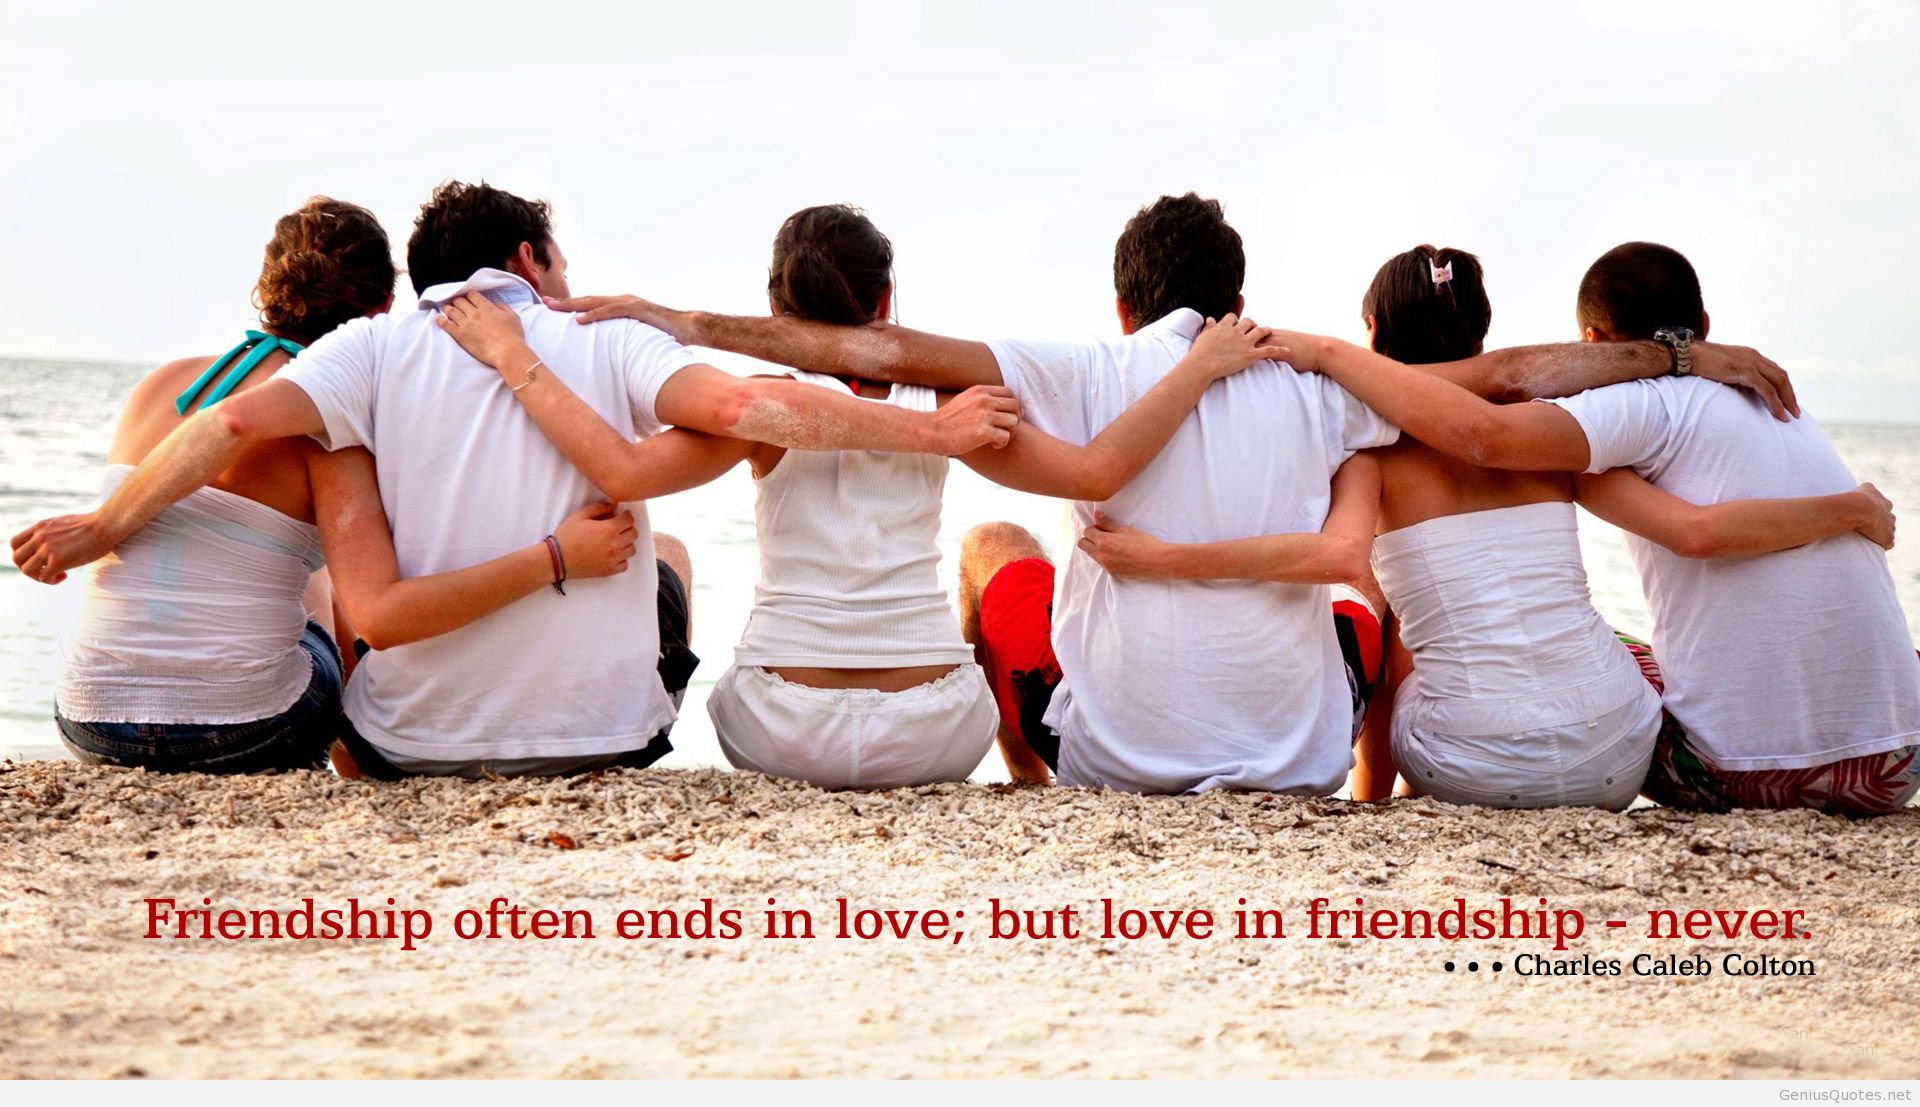 Best Friends Forever Wallpapers Hd Friendship Day Boys And Girls Hd Wallpaper Backgrounds Download